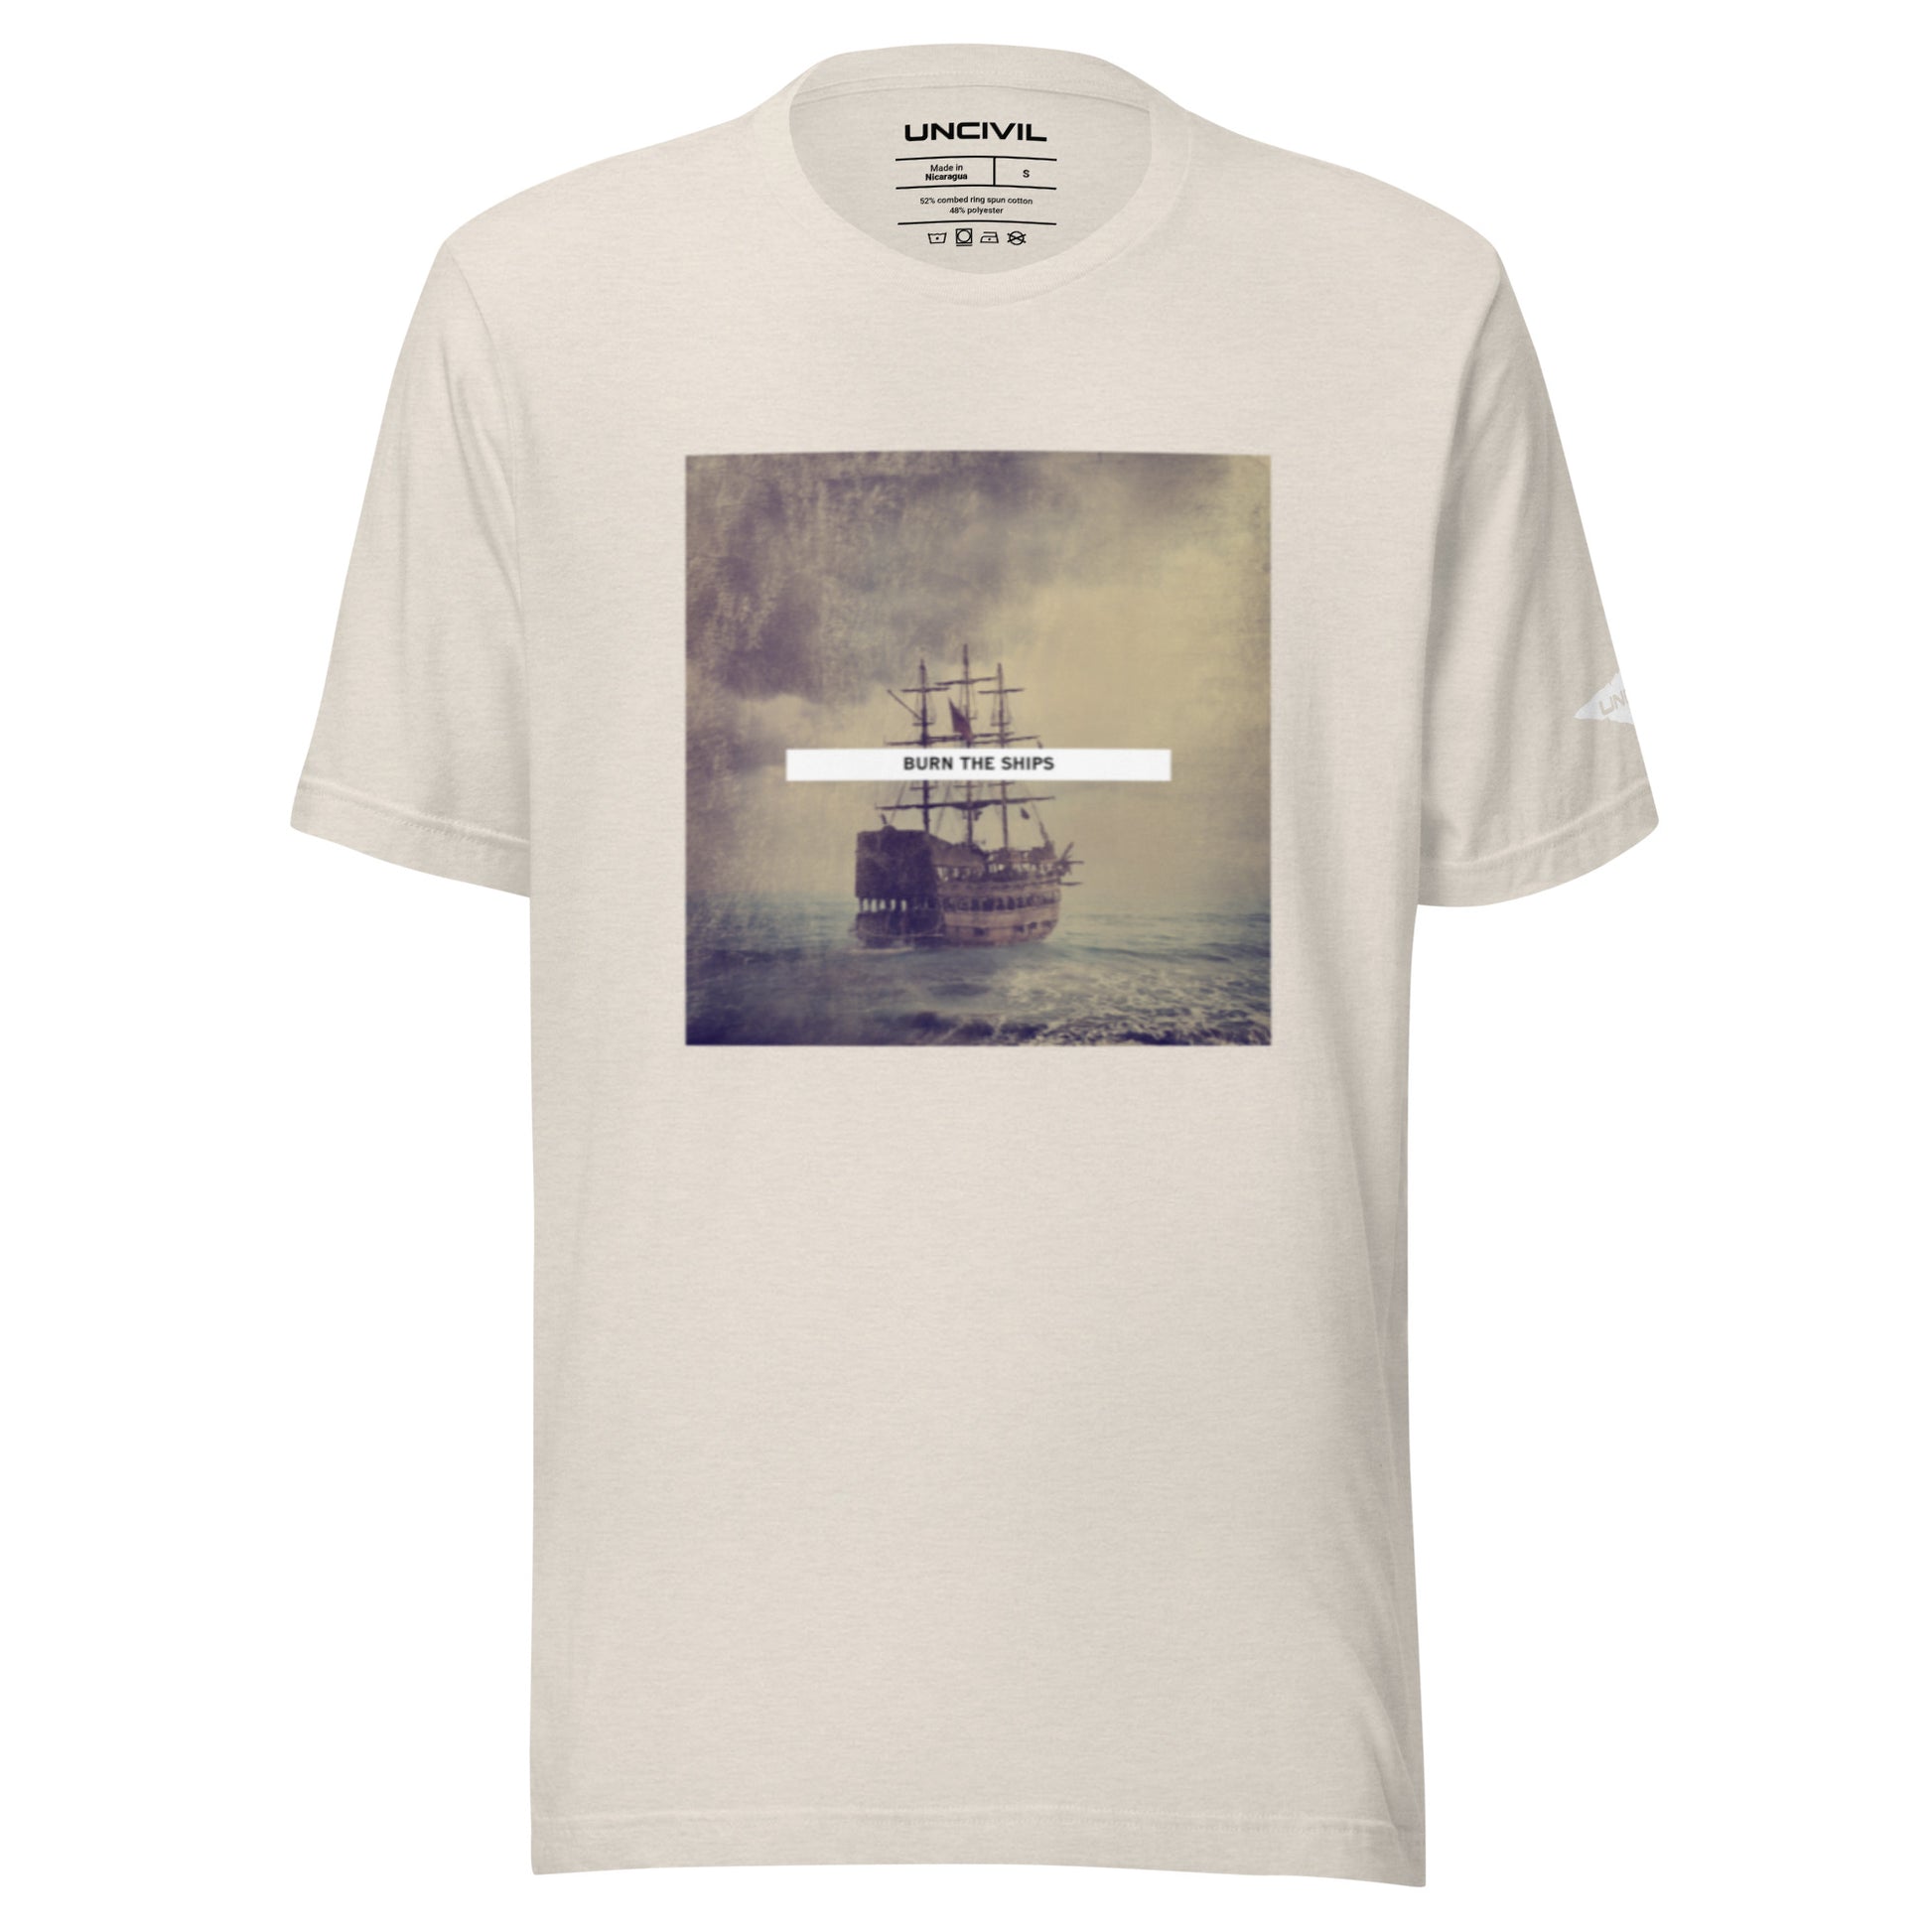 Burn the Ships shirt featuring a vintage image of a sailboat, heather dust for men and women. 